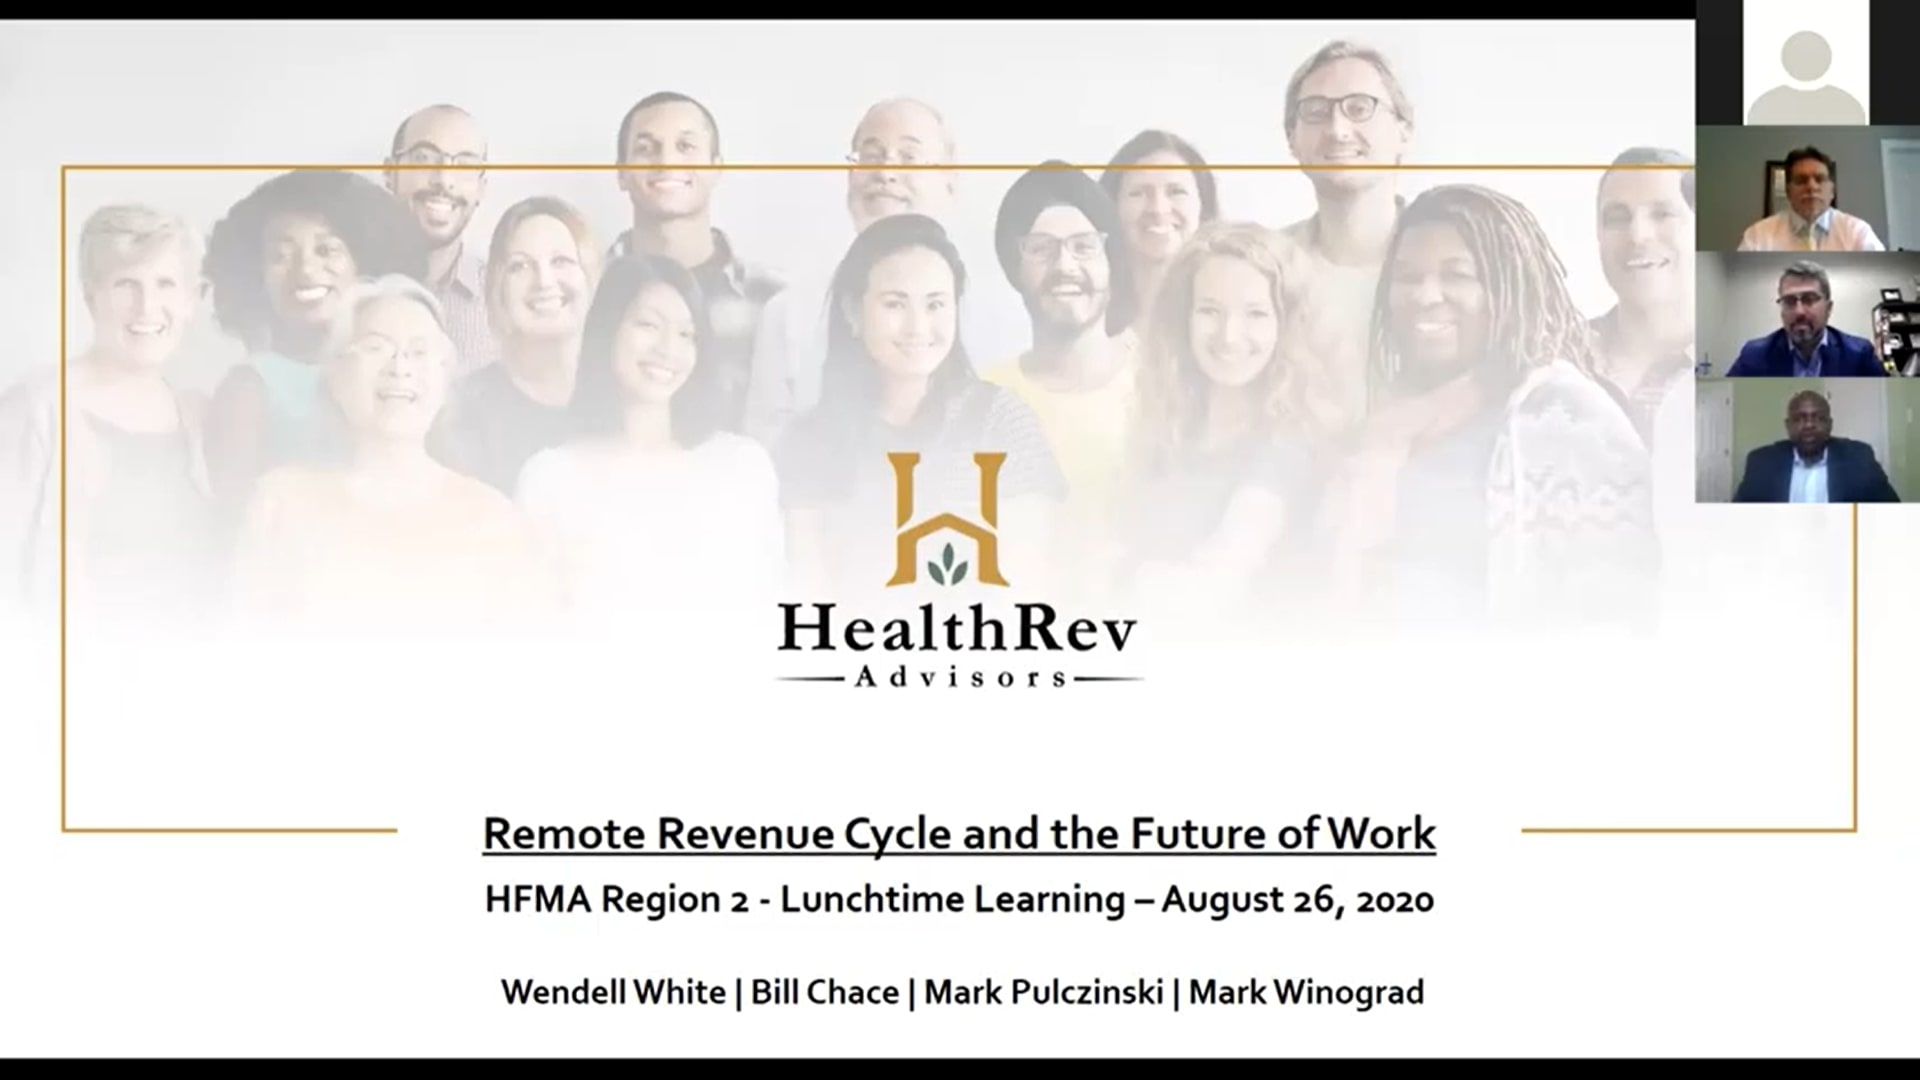 Remote Revenue Cycle and the Future of Work